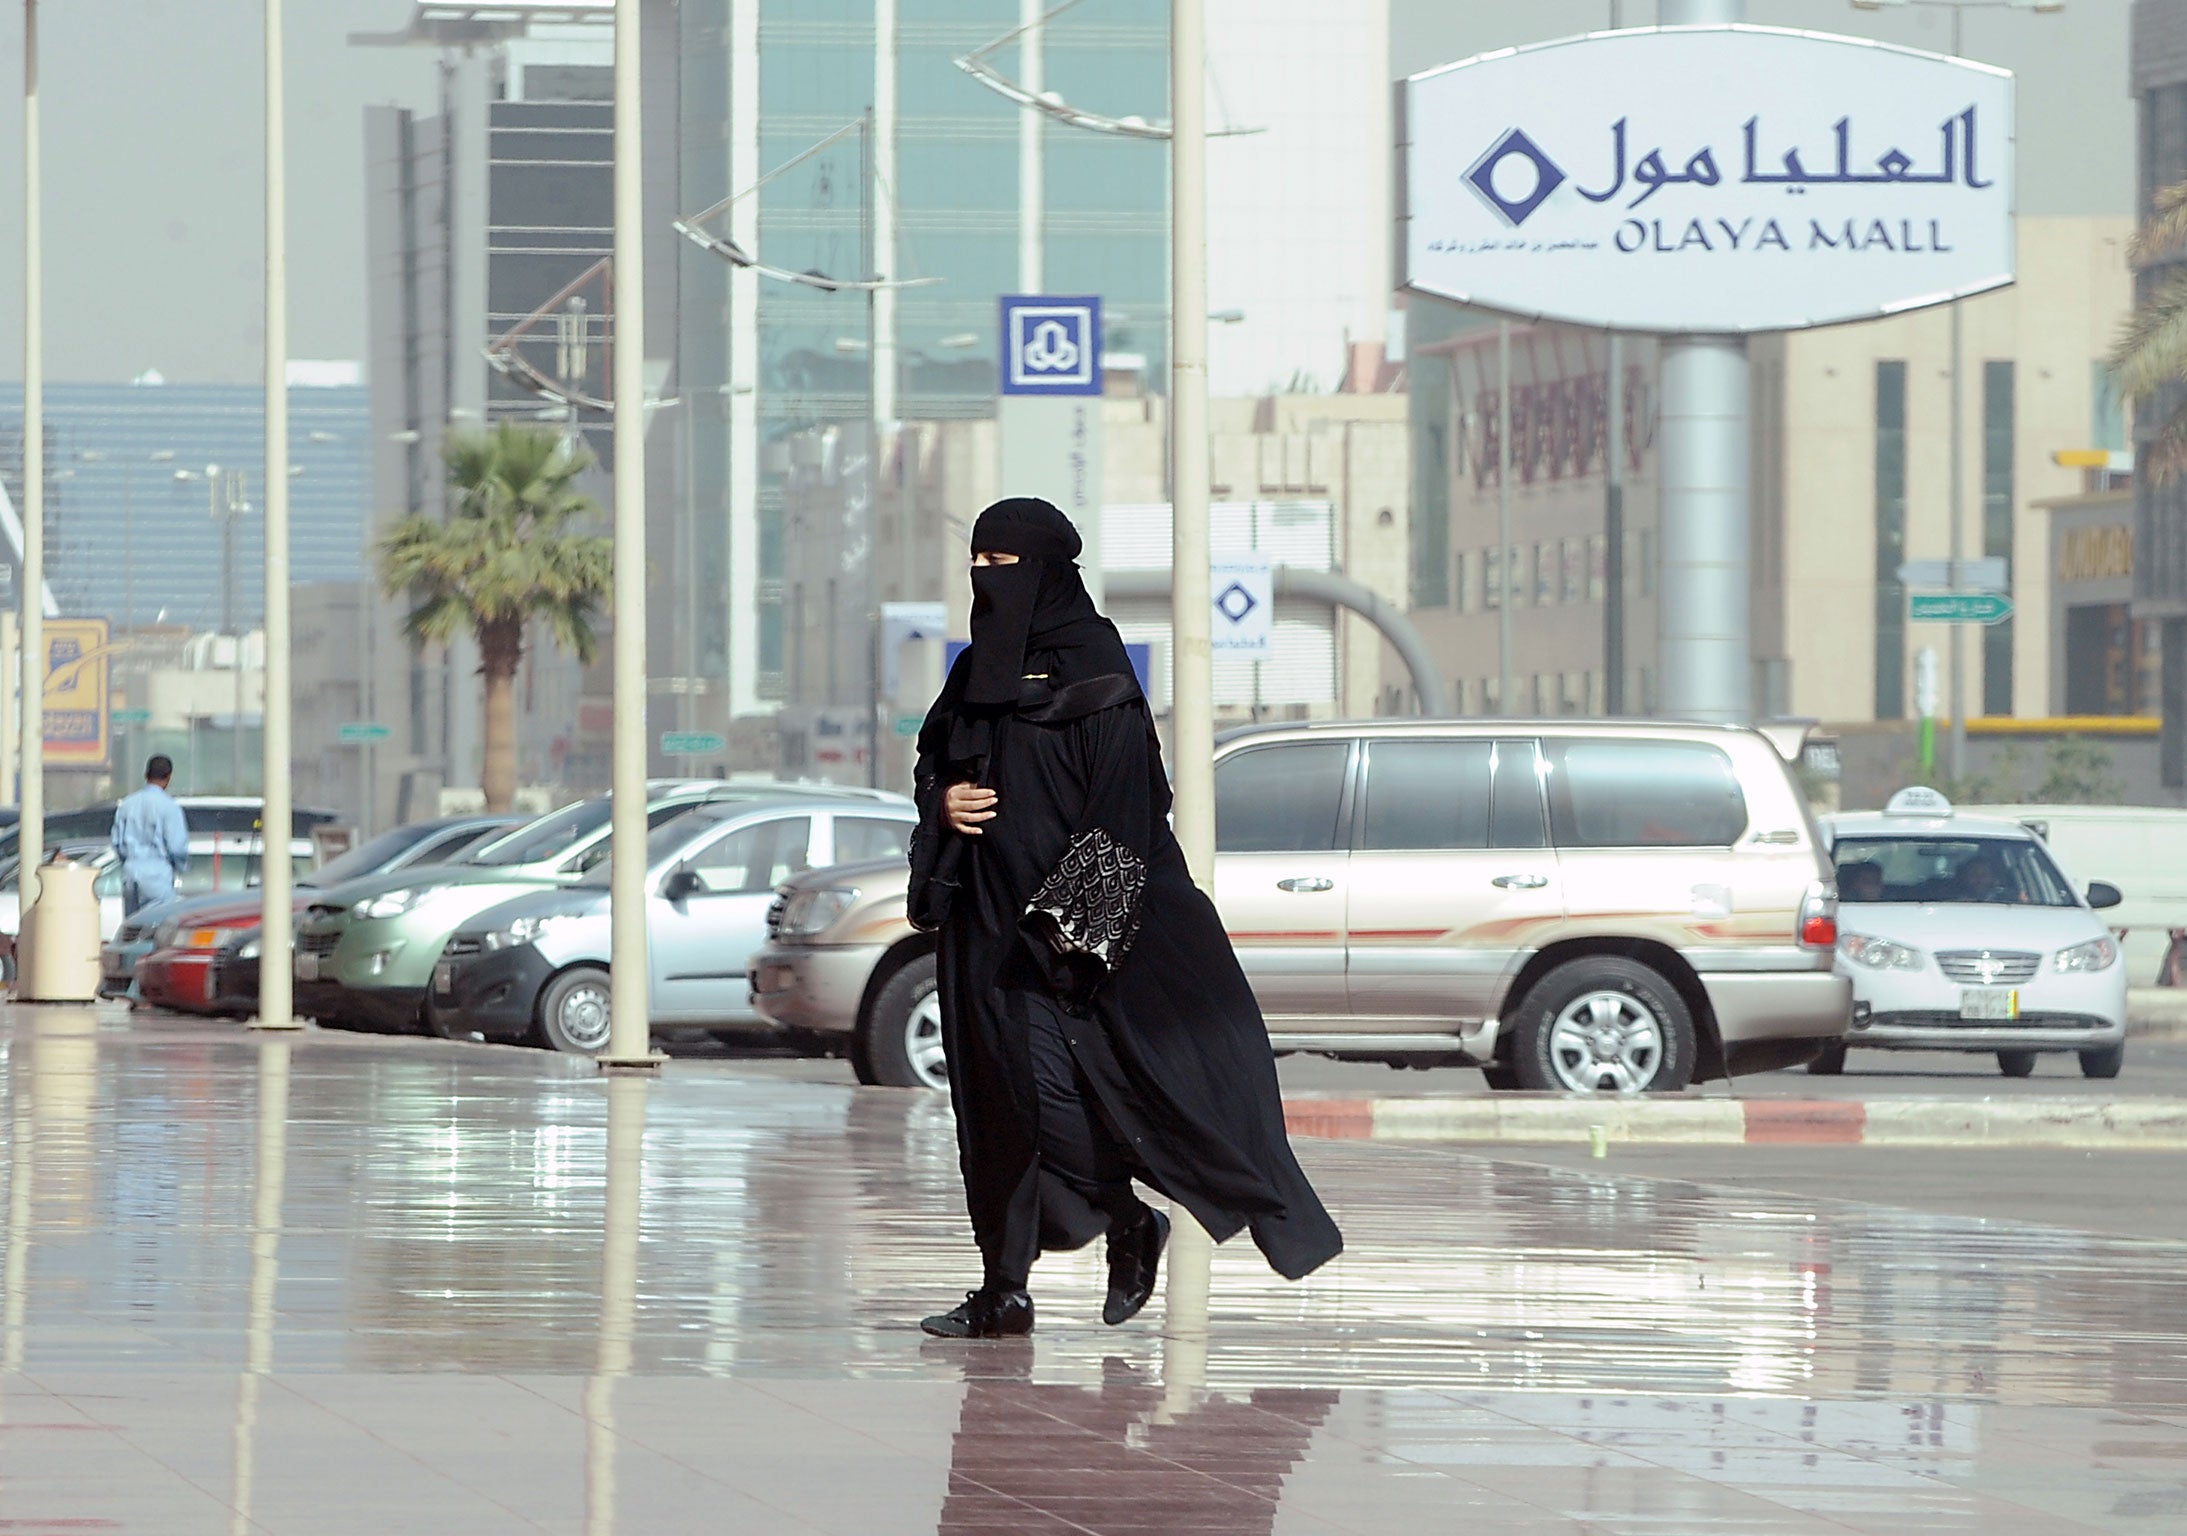 A shooper at the Olaya mall in the Saudi capital of Riyadh. Ordinary citizens may be hit by efforts to tackle global corruption and patronage